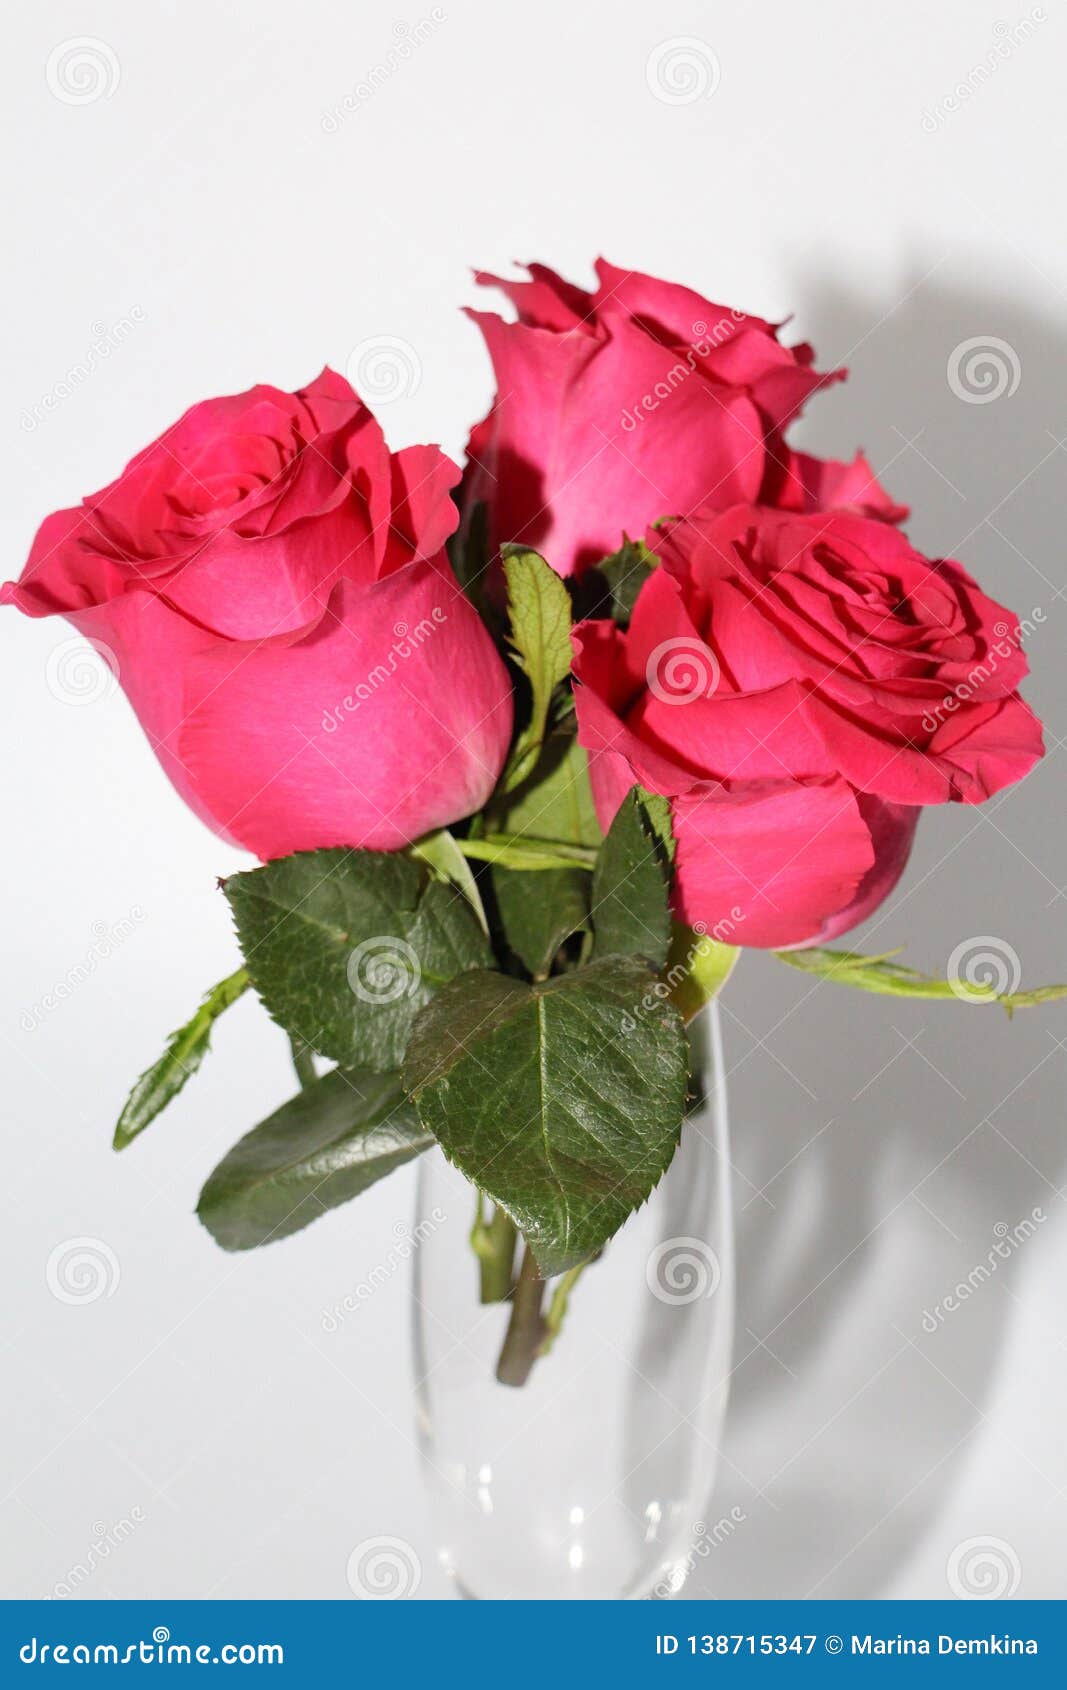 A Bouquet of Three Red Roses Lies on a White Background Stock Image ...